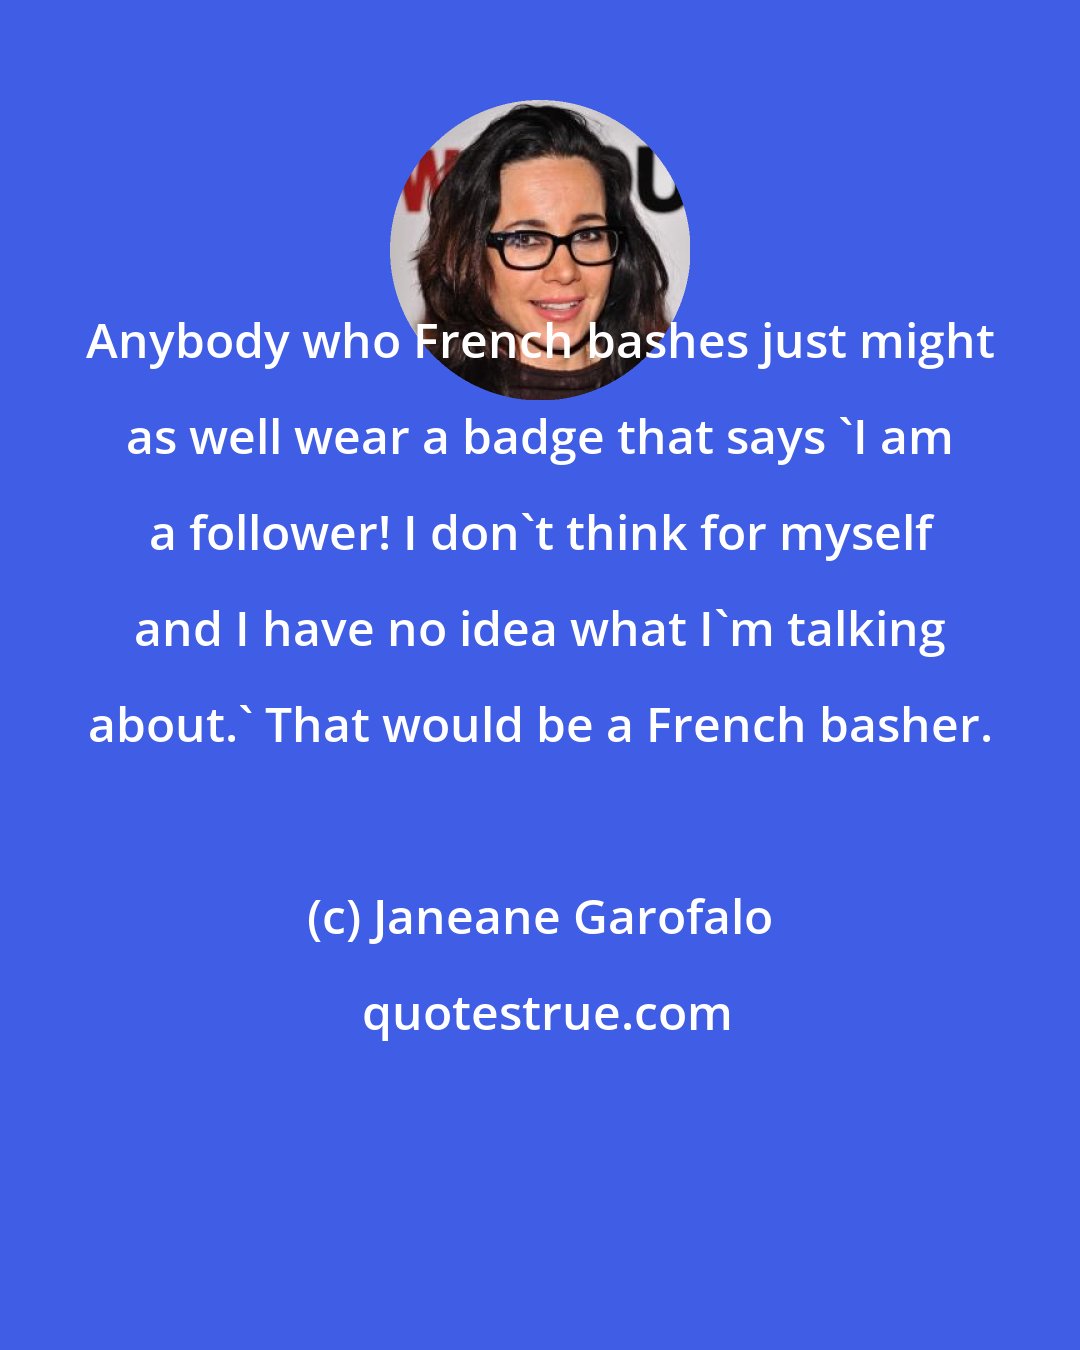 Janeane Garofalo: Anybody who French bashes just might as well wear a badge that says 'I am a follower! I don't think for myself and I have no idea what I'm talking about.' That would be a French basher.